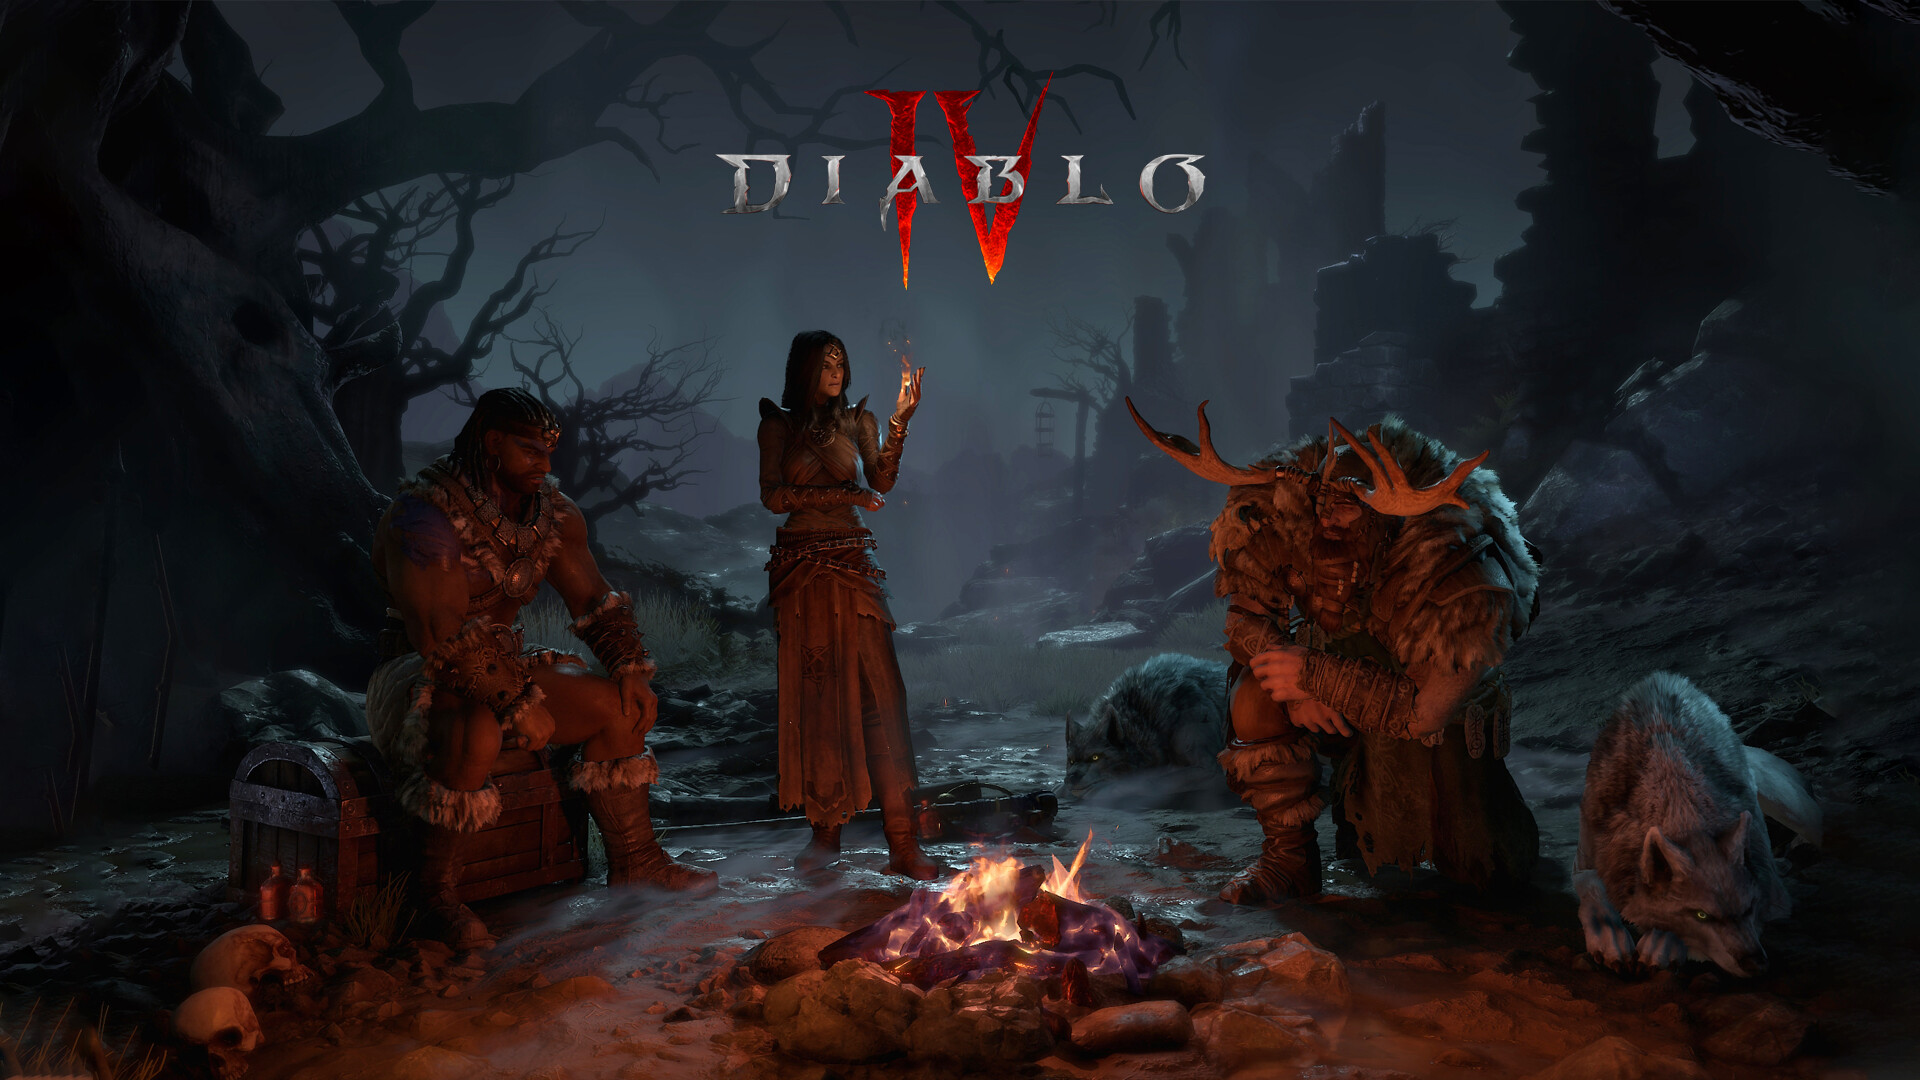 Diablo: A fast-paced action RPG with heroes facing the onslaught of a demonic invasion. 1920x1080 Full HD Wallpaper.